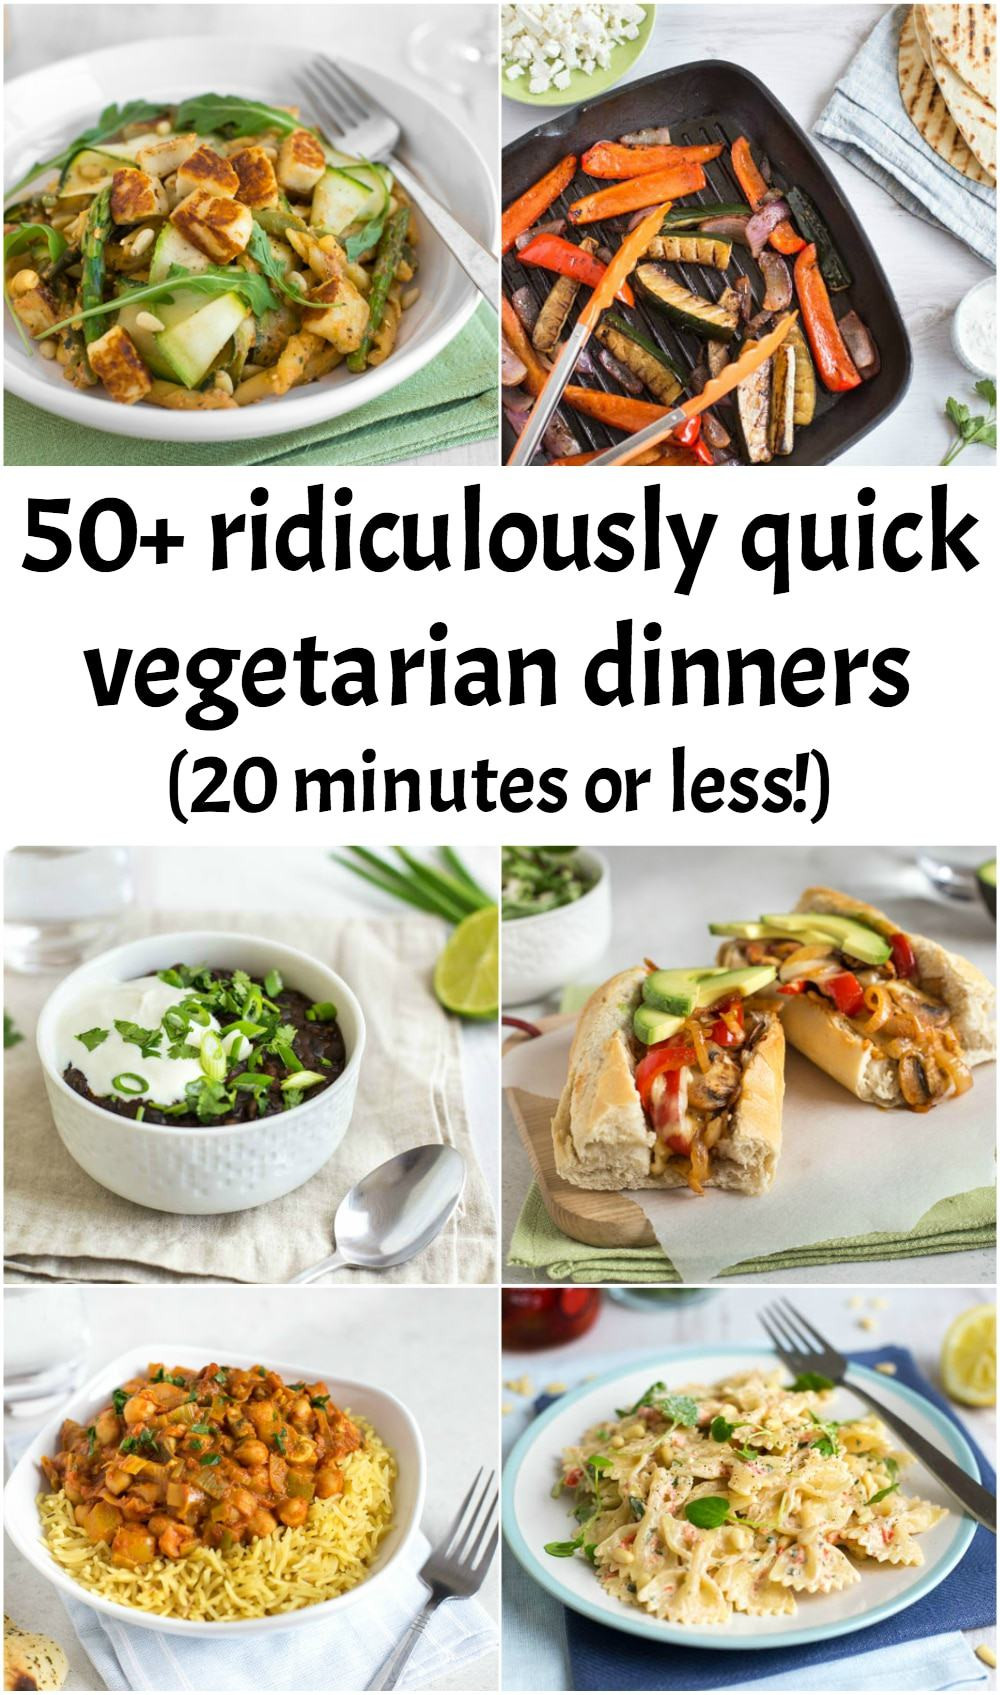 Easy Vegan Meals Quick
 50 ridiculously quick ve arian dinners 20 minutes or